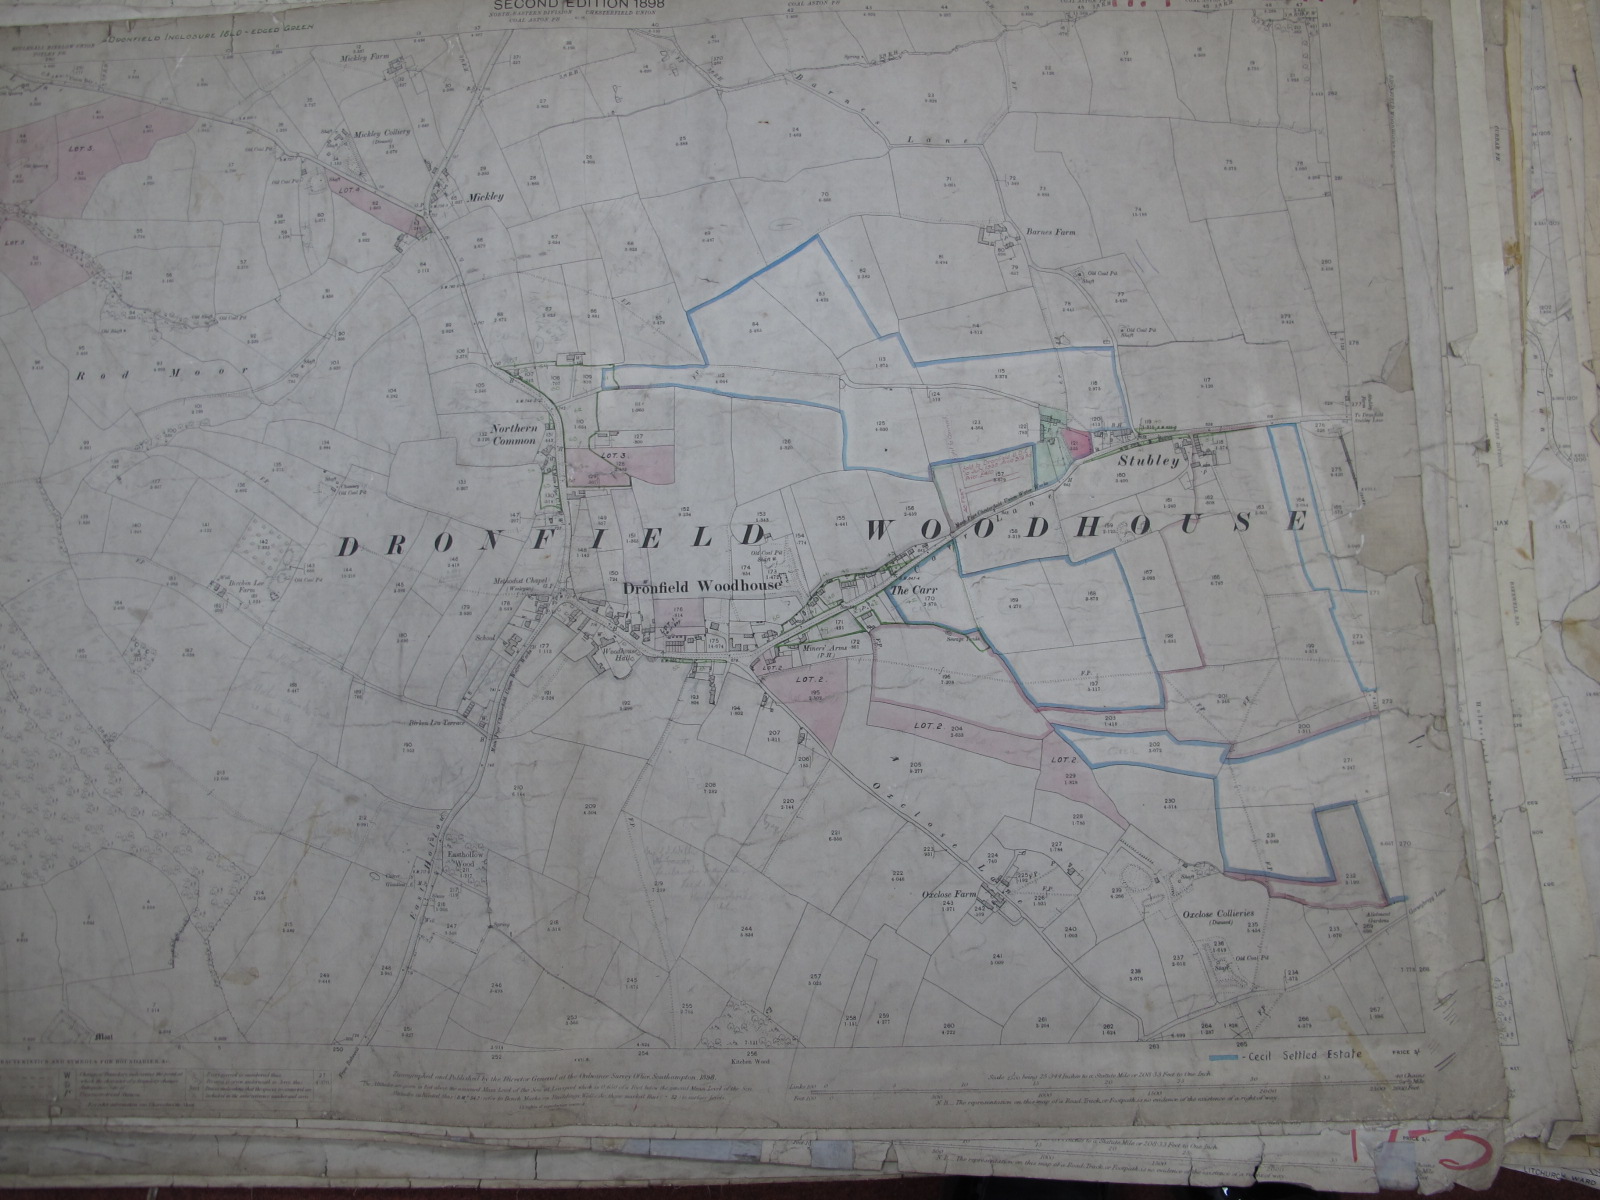 Derbyshire Maps, to include Eckington, Renishaw, Coal Aston, Scarsdale, Dronfield, Dronfield - Image 6 of 11